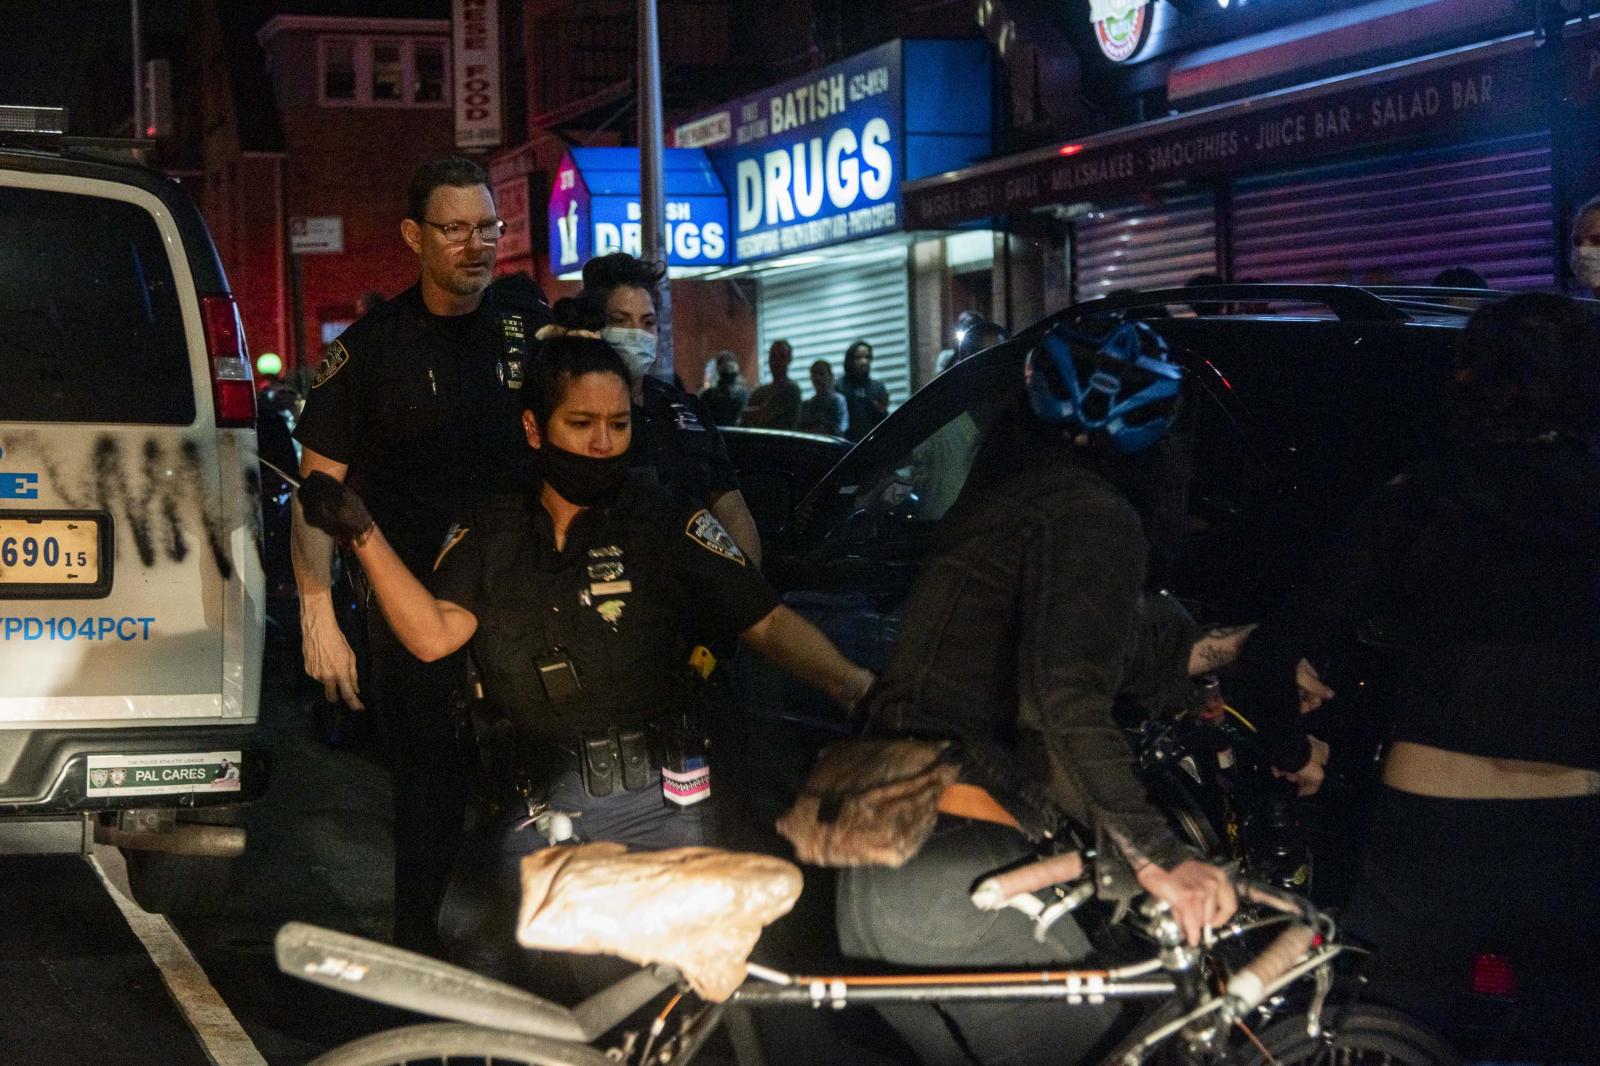 Image from NYC: MidiaNinja - Protesters confront the Police outside Barclay's...